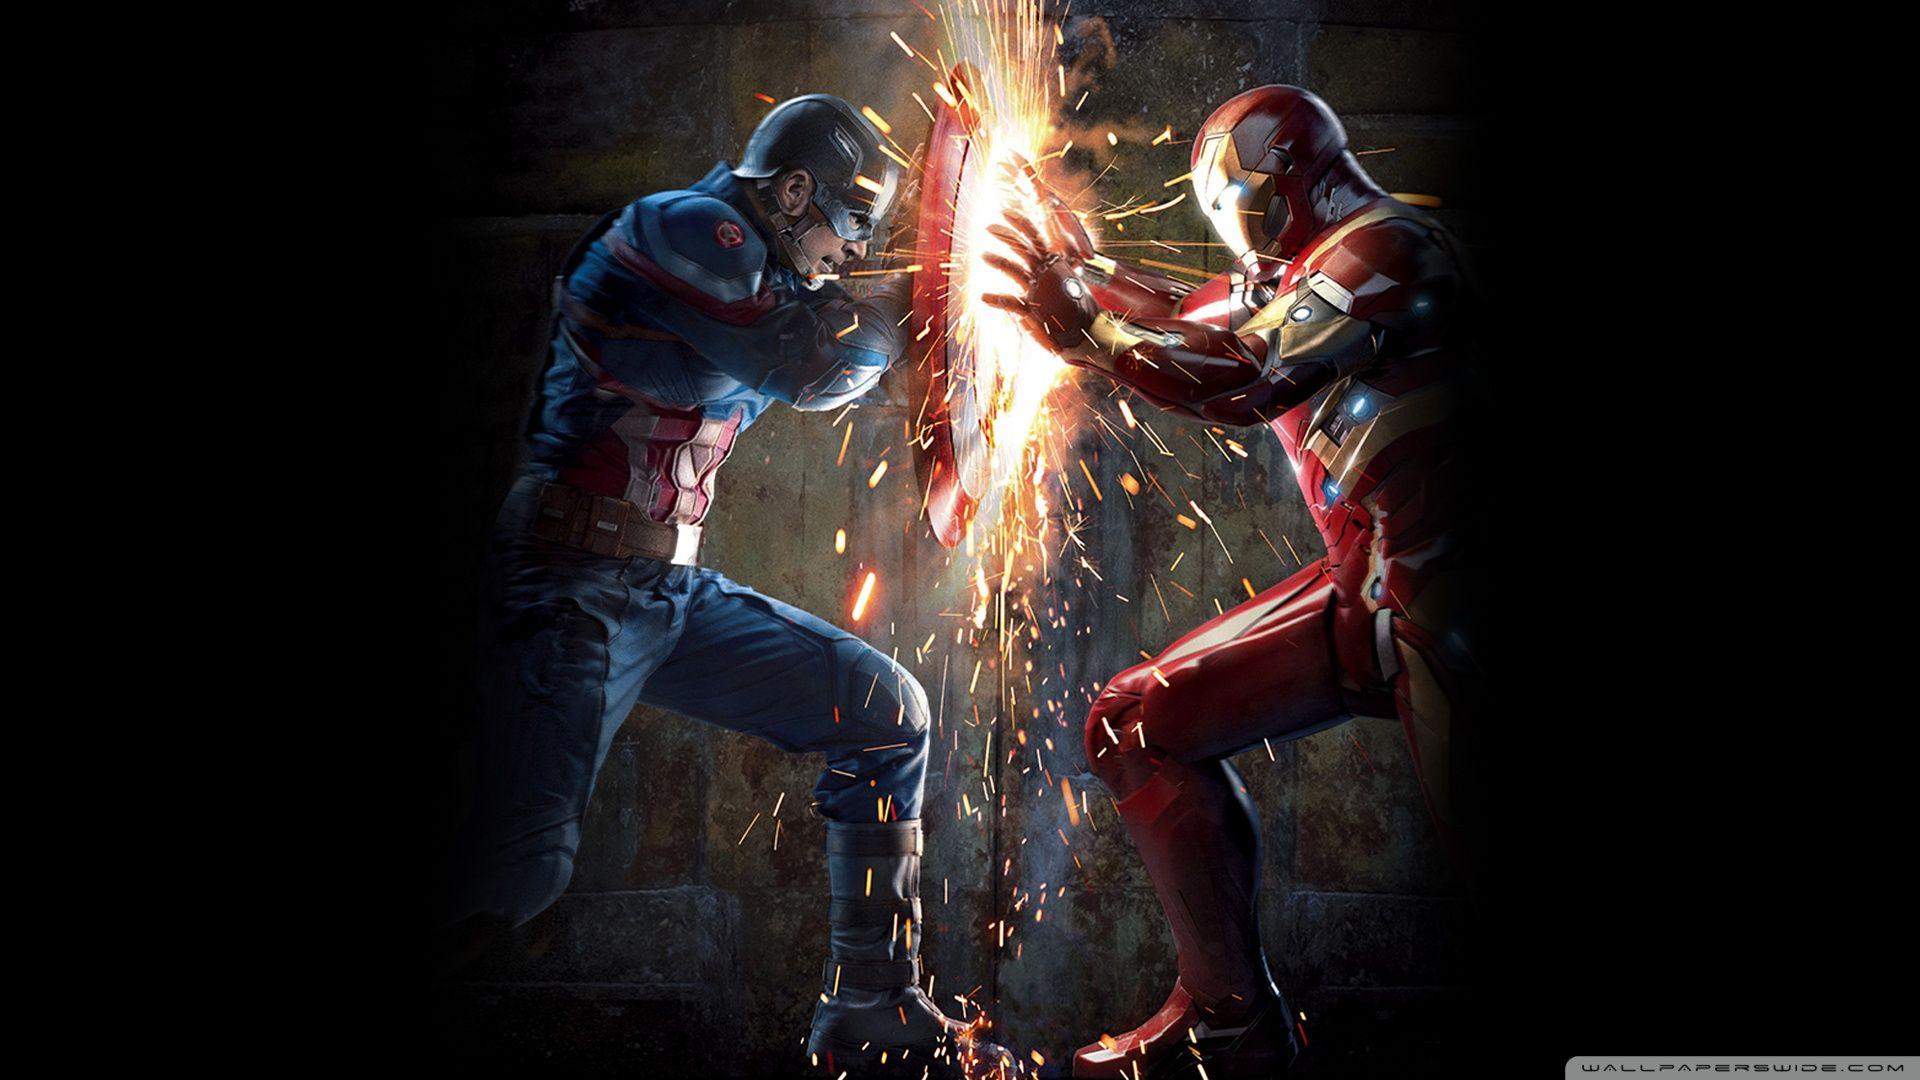 download the new for ios Captain America: Civil War